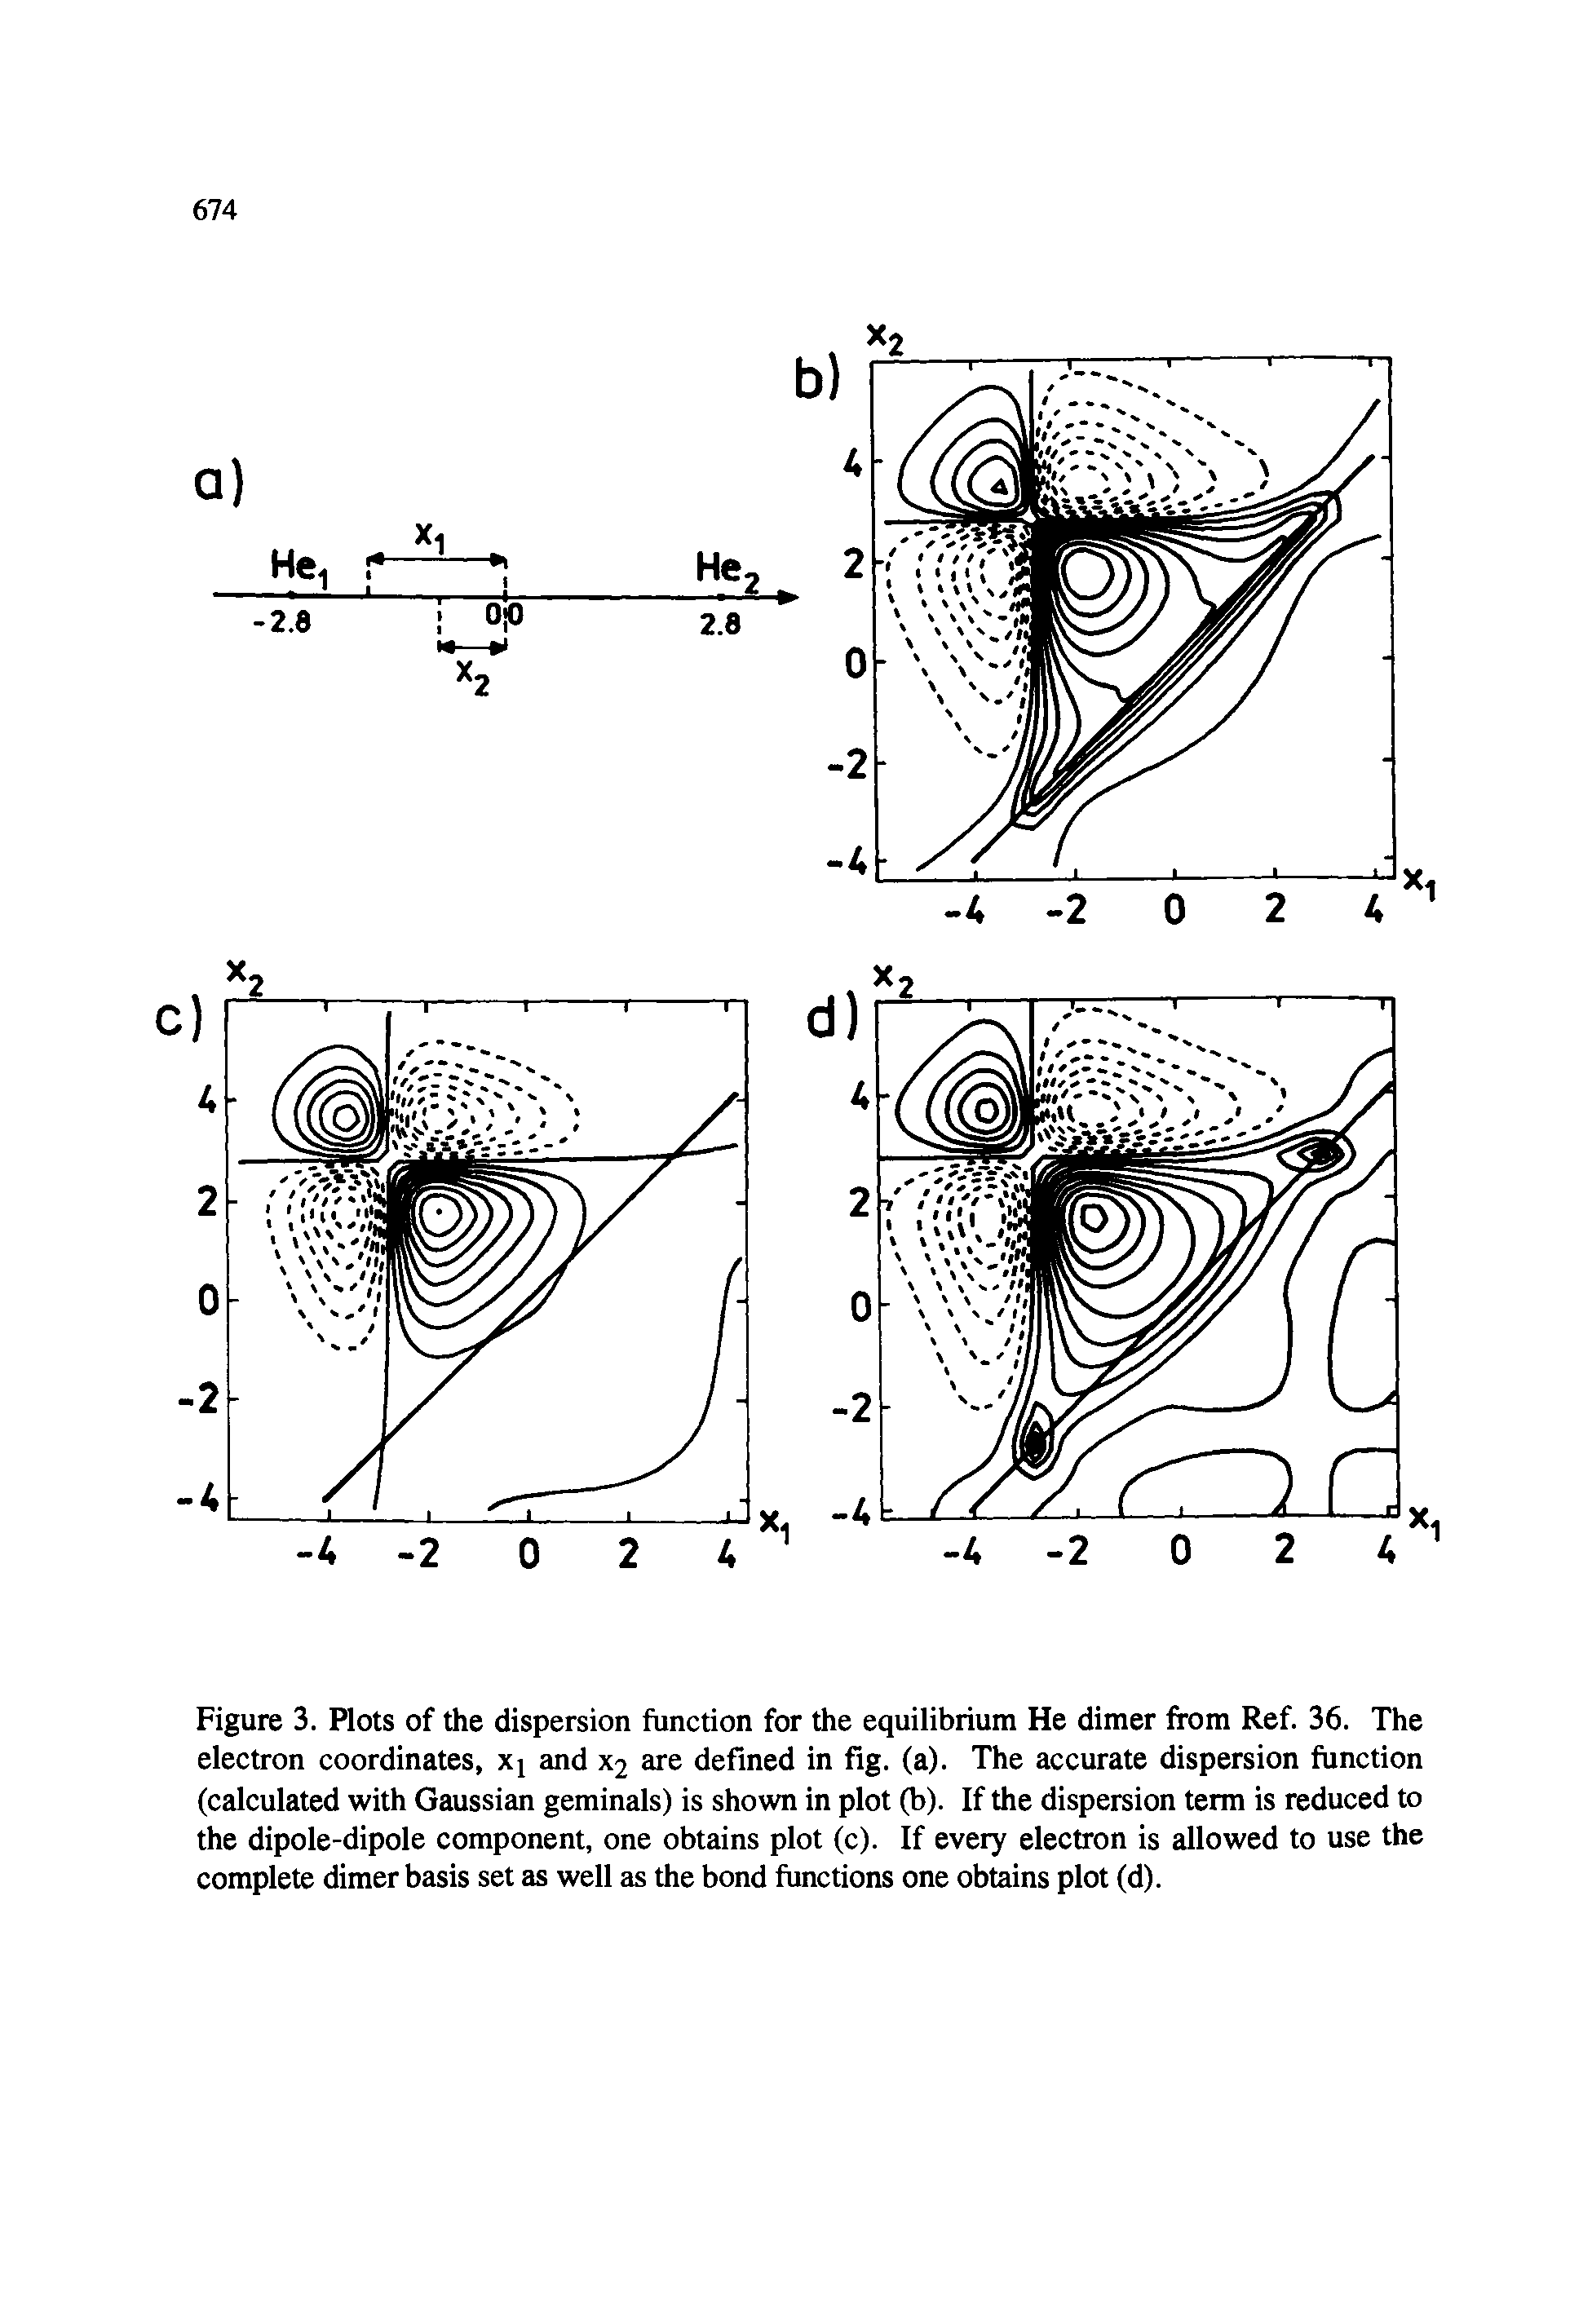 Figure 3. Plots of the dispersion function for the equilibrium He dimer from Ref. 36. The electron coordinates, xj and X2 are defined in fig. (a). The accurate dispersion function (calculated with Gaussian geminals) is shown in plot (b). If the dispersion term is reduced to the dipole-dipole component, one obtains plot (c). If every electron is allowed to use the complete dimer basis set as well as the bond functions one obtains plot (d).